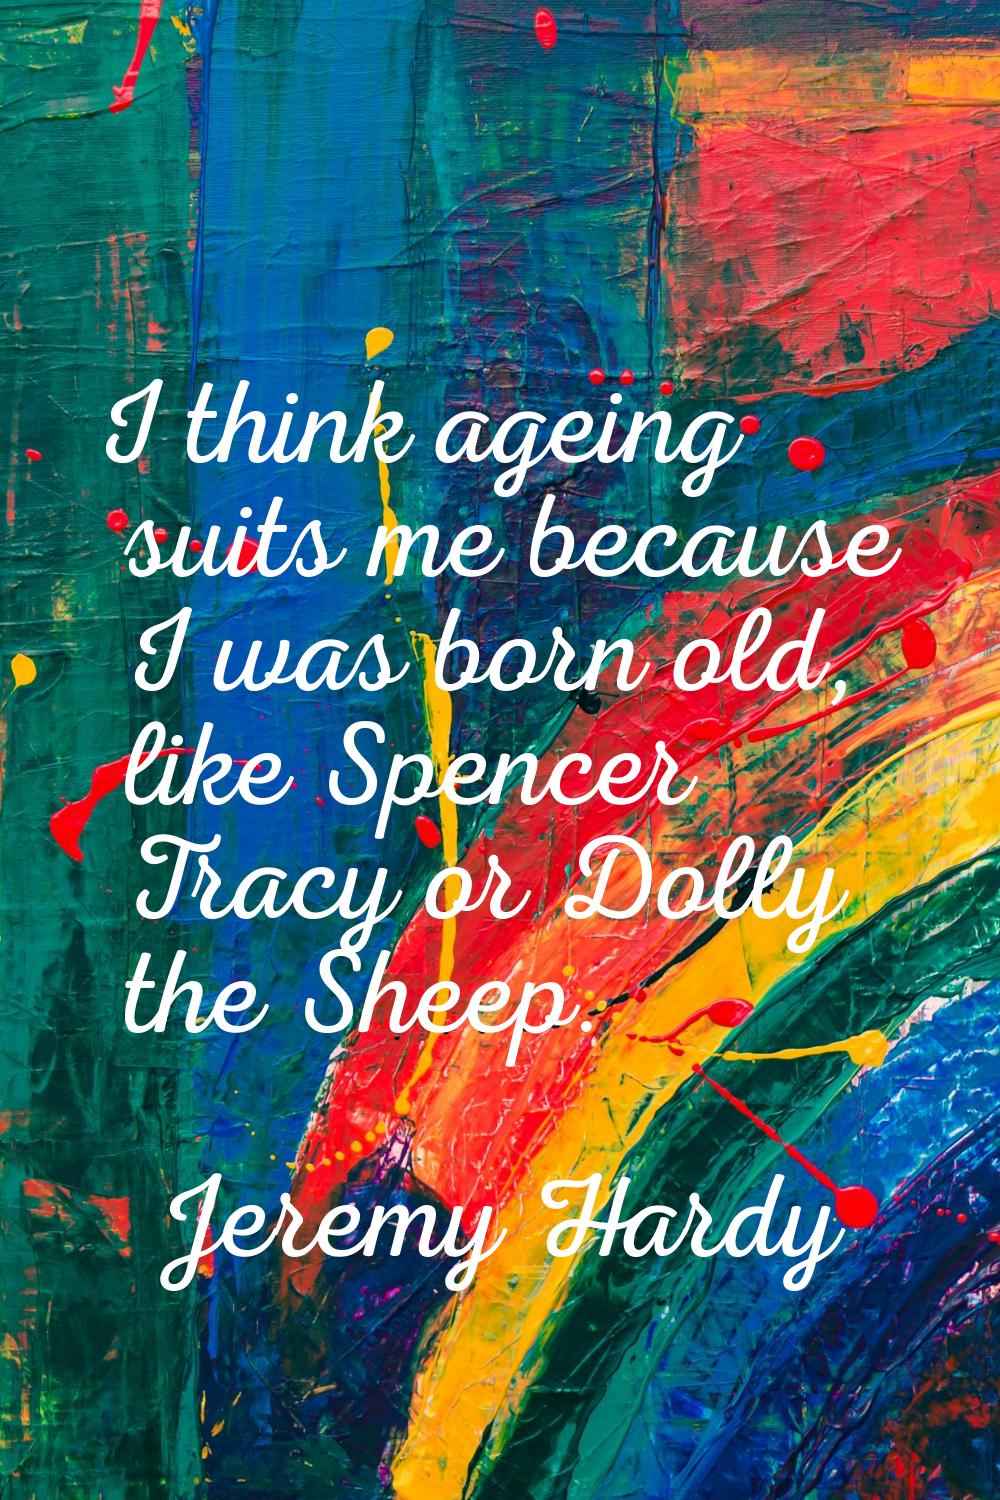 I think ageing suits me because I was born old, like Spencer Tracy or Dolly the Sheep.